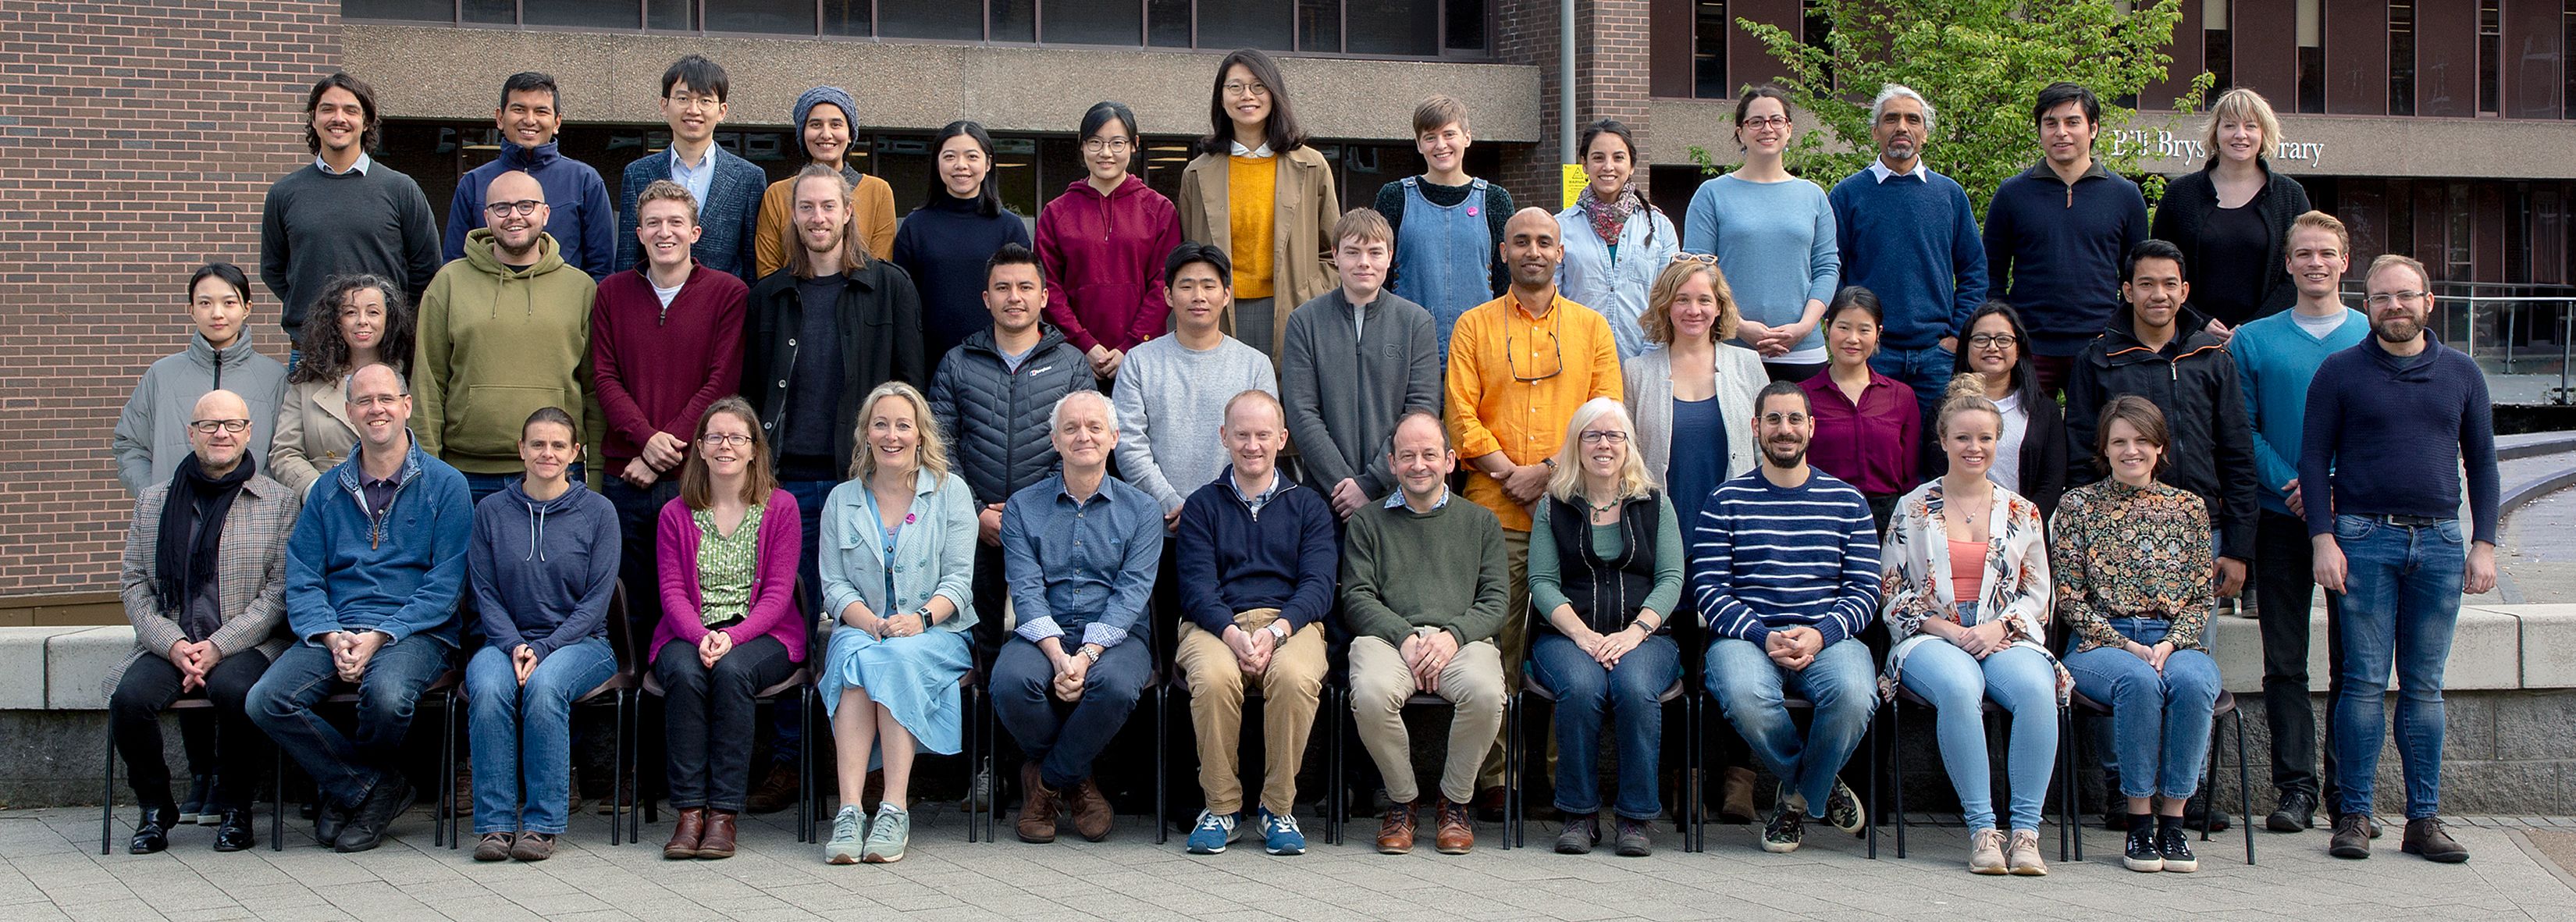 Geography Department Postgraduate Group Photo from 2019